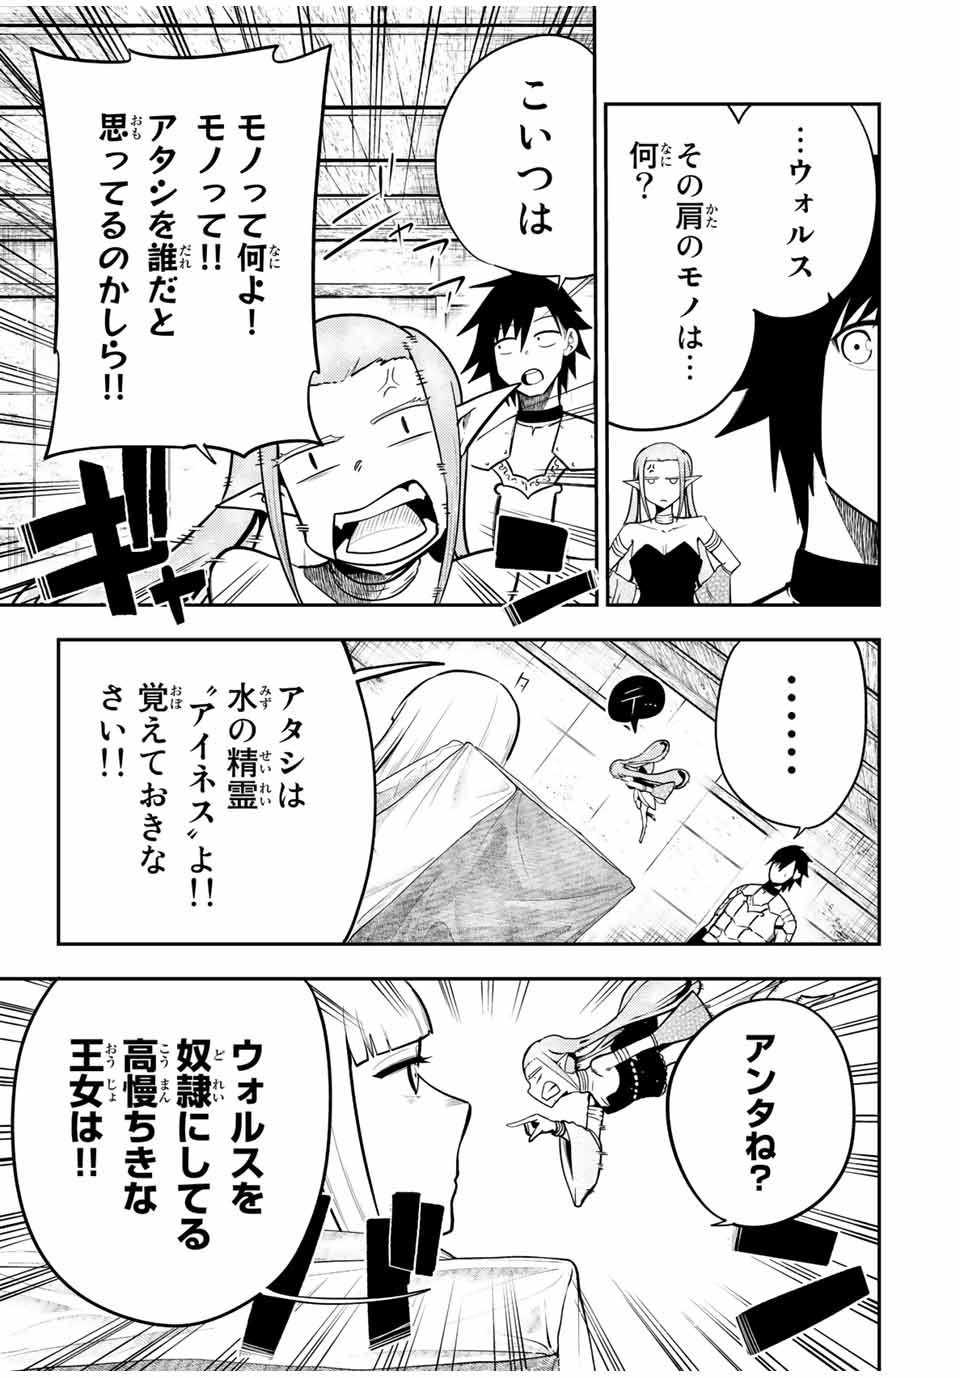 the strongest former prince-; 奴隷転生 ～その奴隷、最強の元王子につき～ 第78話 - Page 9